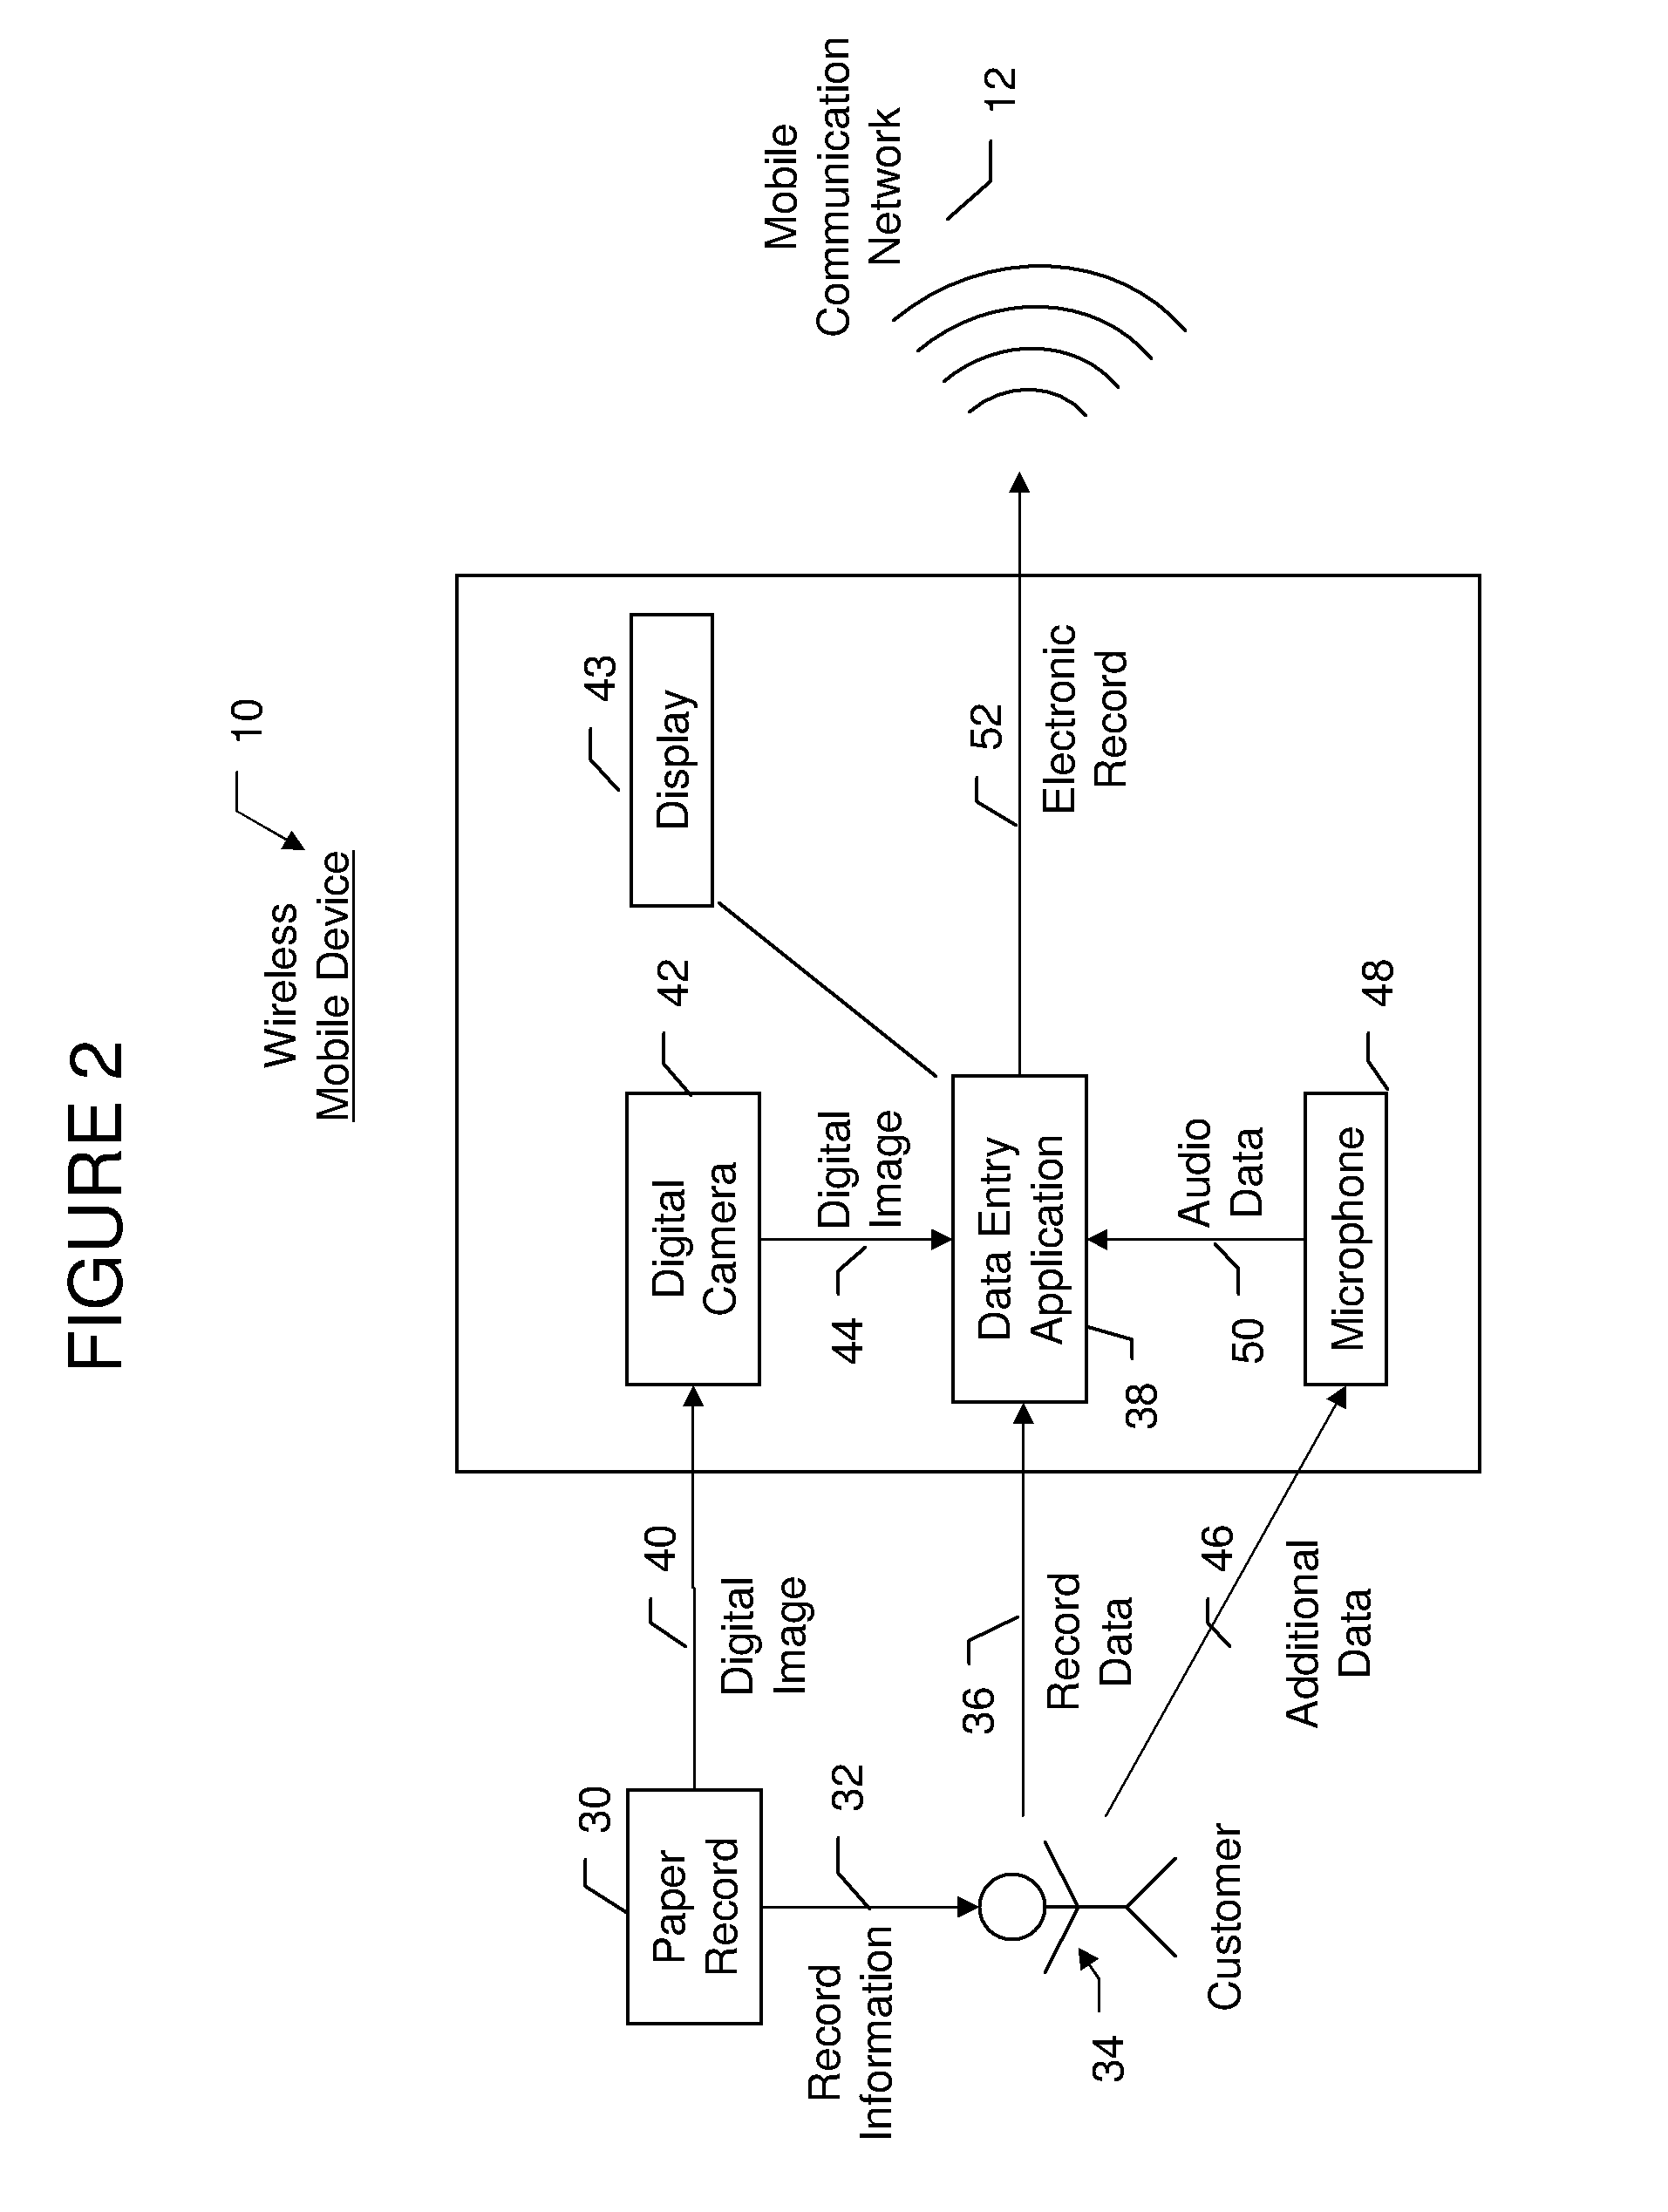 Mobile paper record processing system